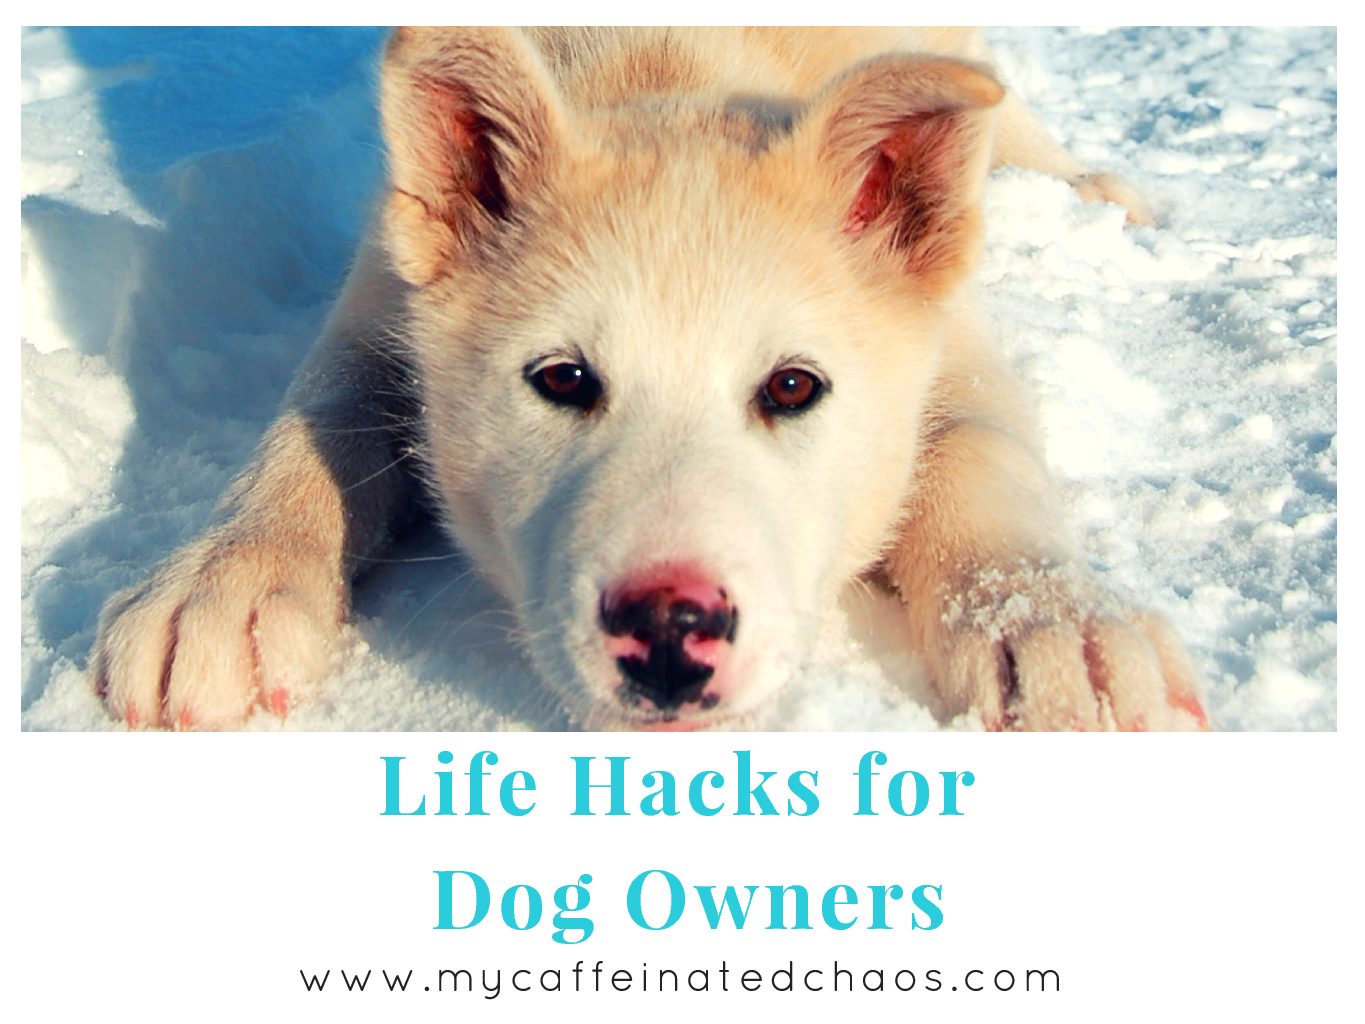 Life Hacks for Dog Owners